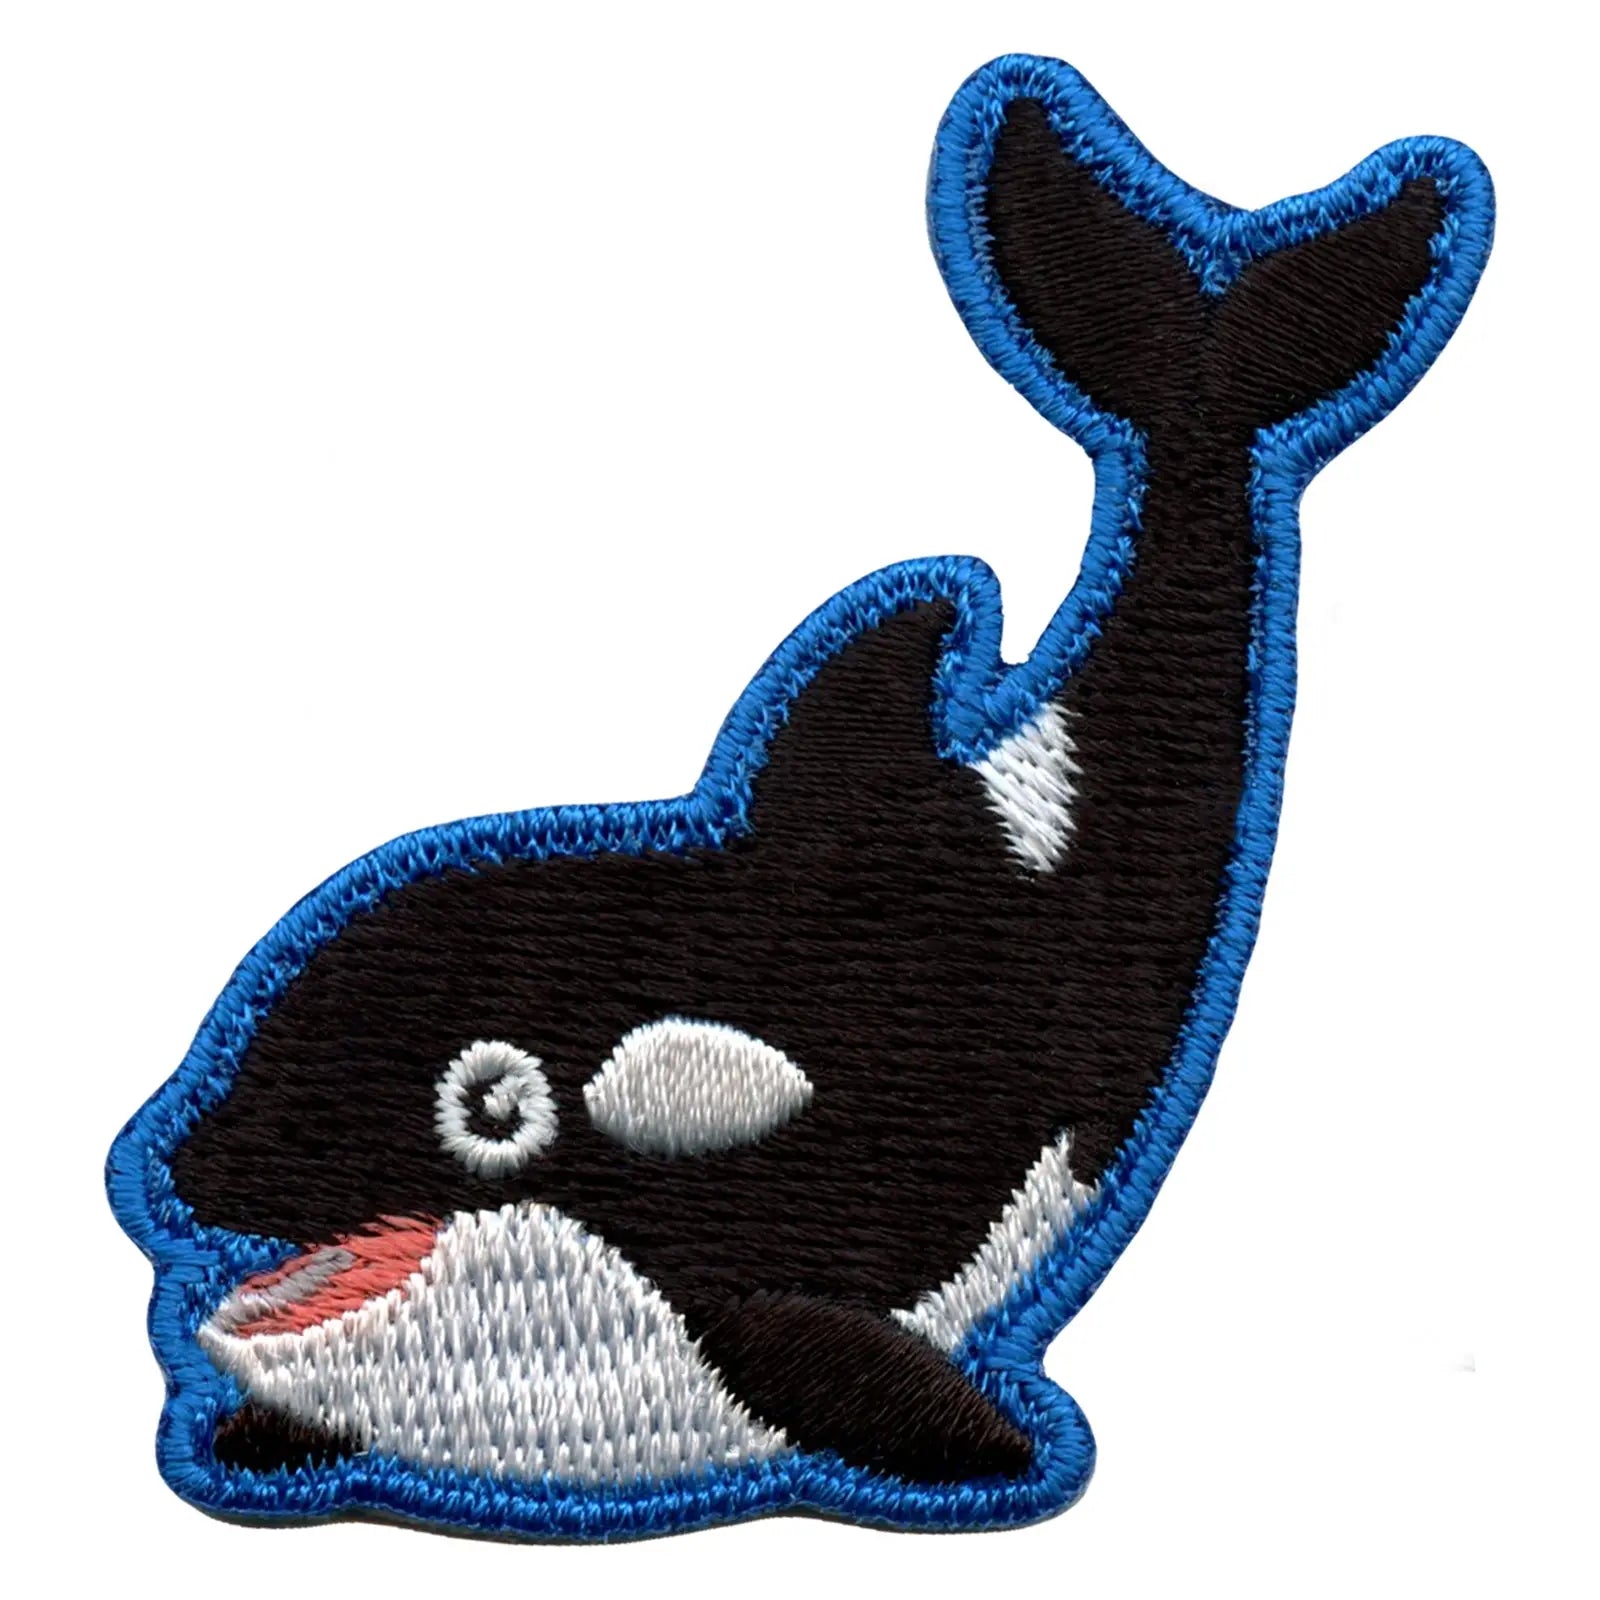 Orca Whale Embroidered Iron On Patch 